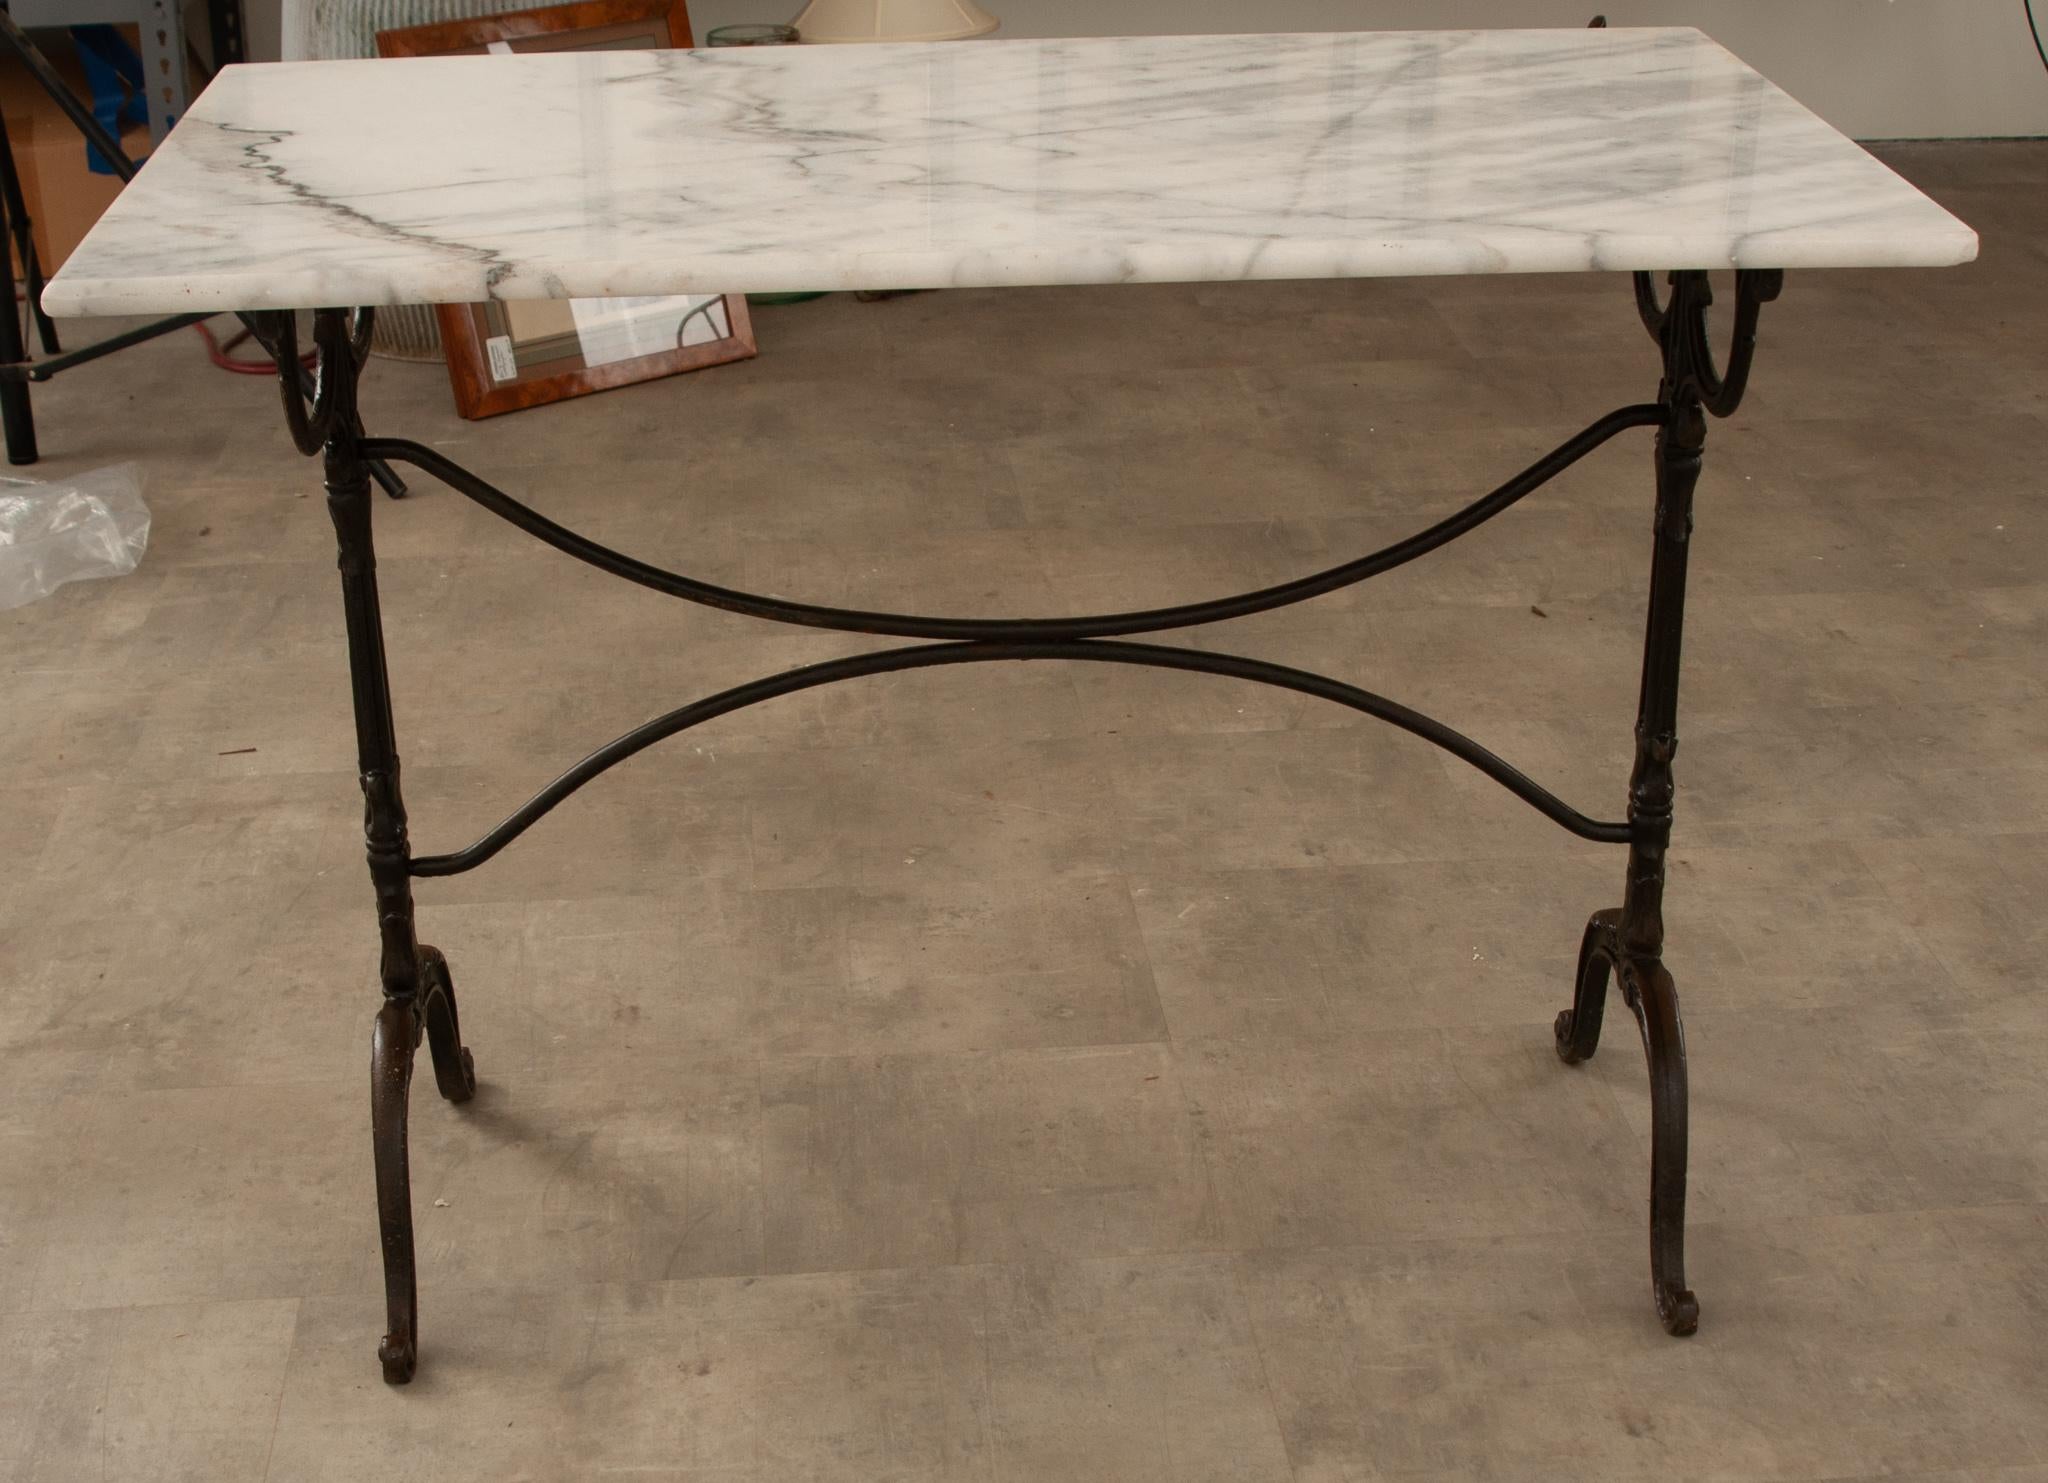 A delightful French marble-top bistro table with a classically styled black painted iron base. The marble top has beautiful charcoal veining and inclusions throughout. The base has X-form supports and the scroll-form feet. Great for an outdoor patio